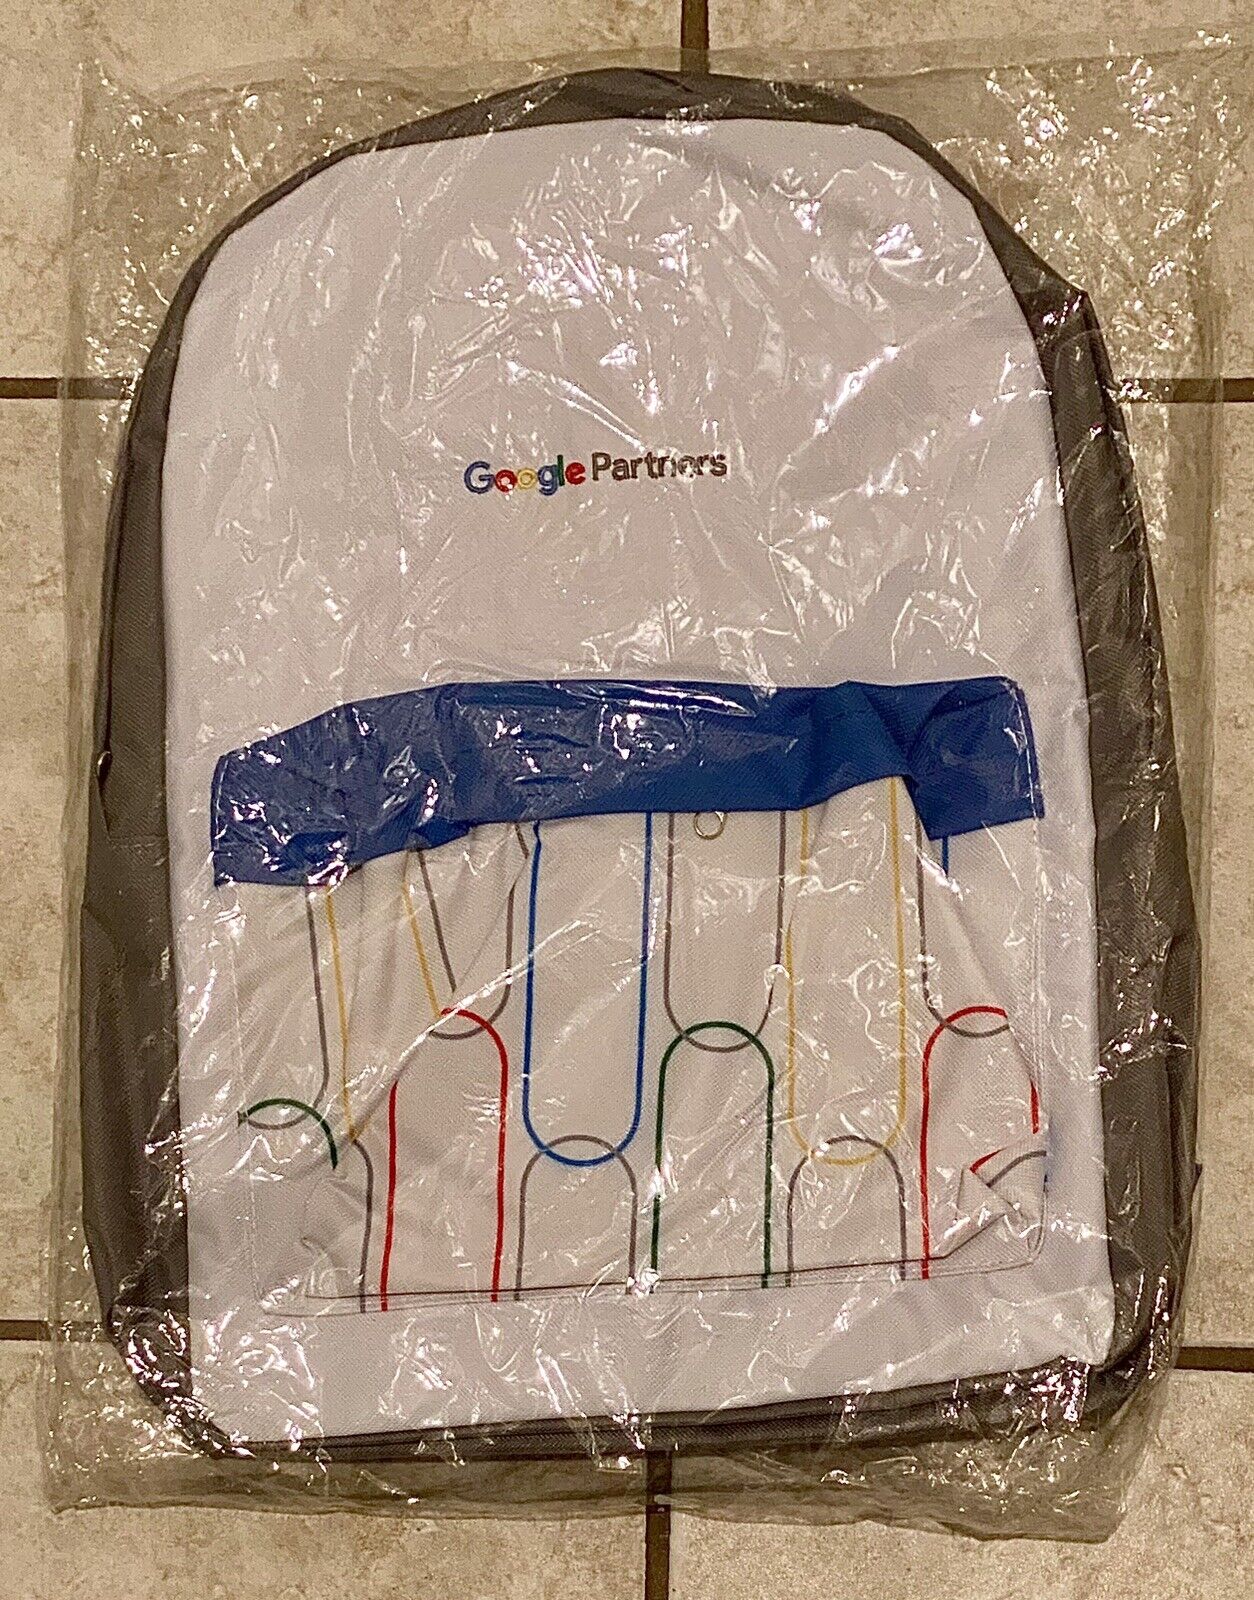 RARE Sealed Google Partners Backpack Exclusive. Only One On eBay New In Plastic